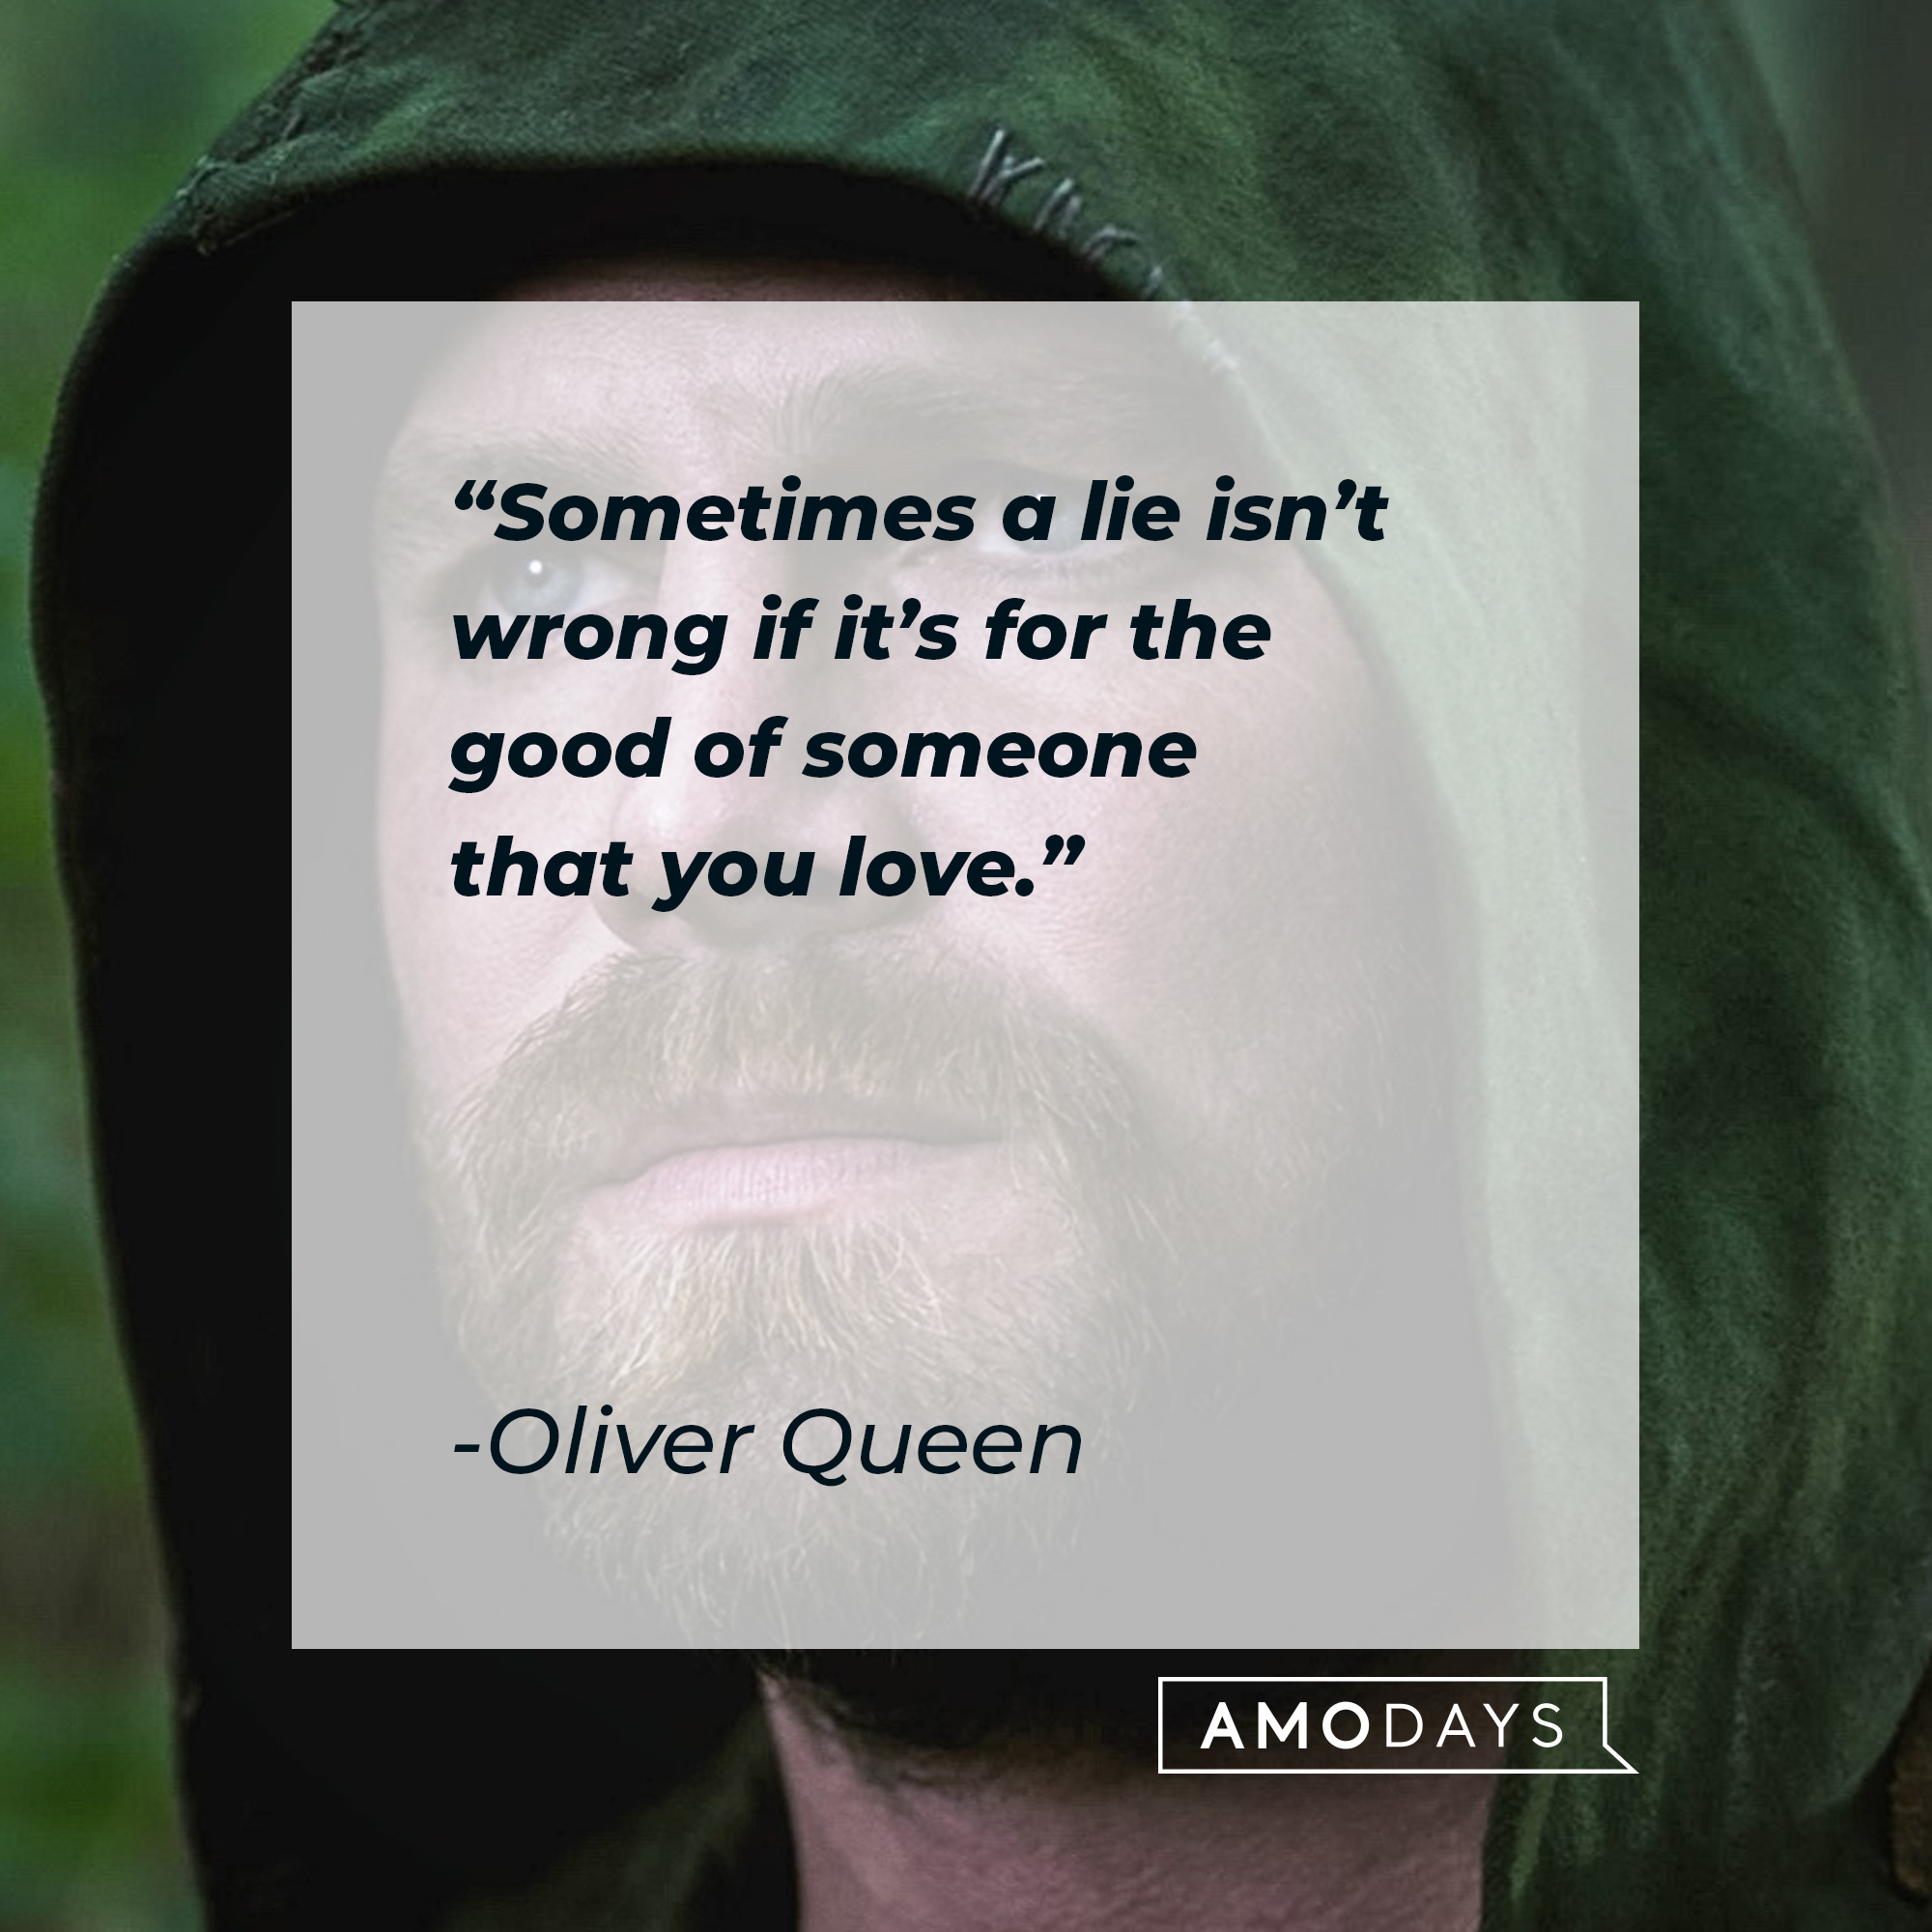 An image of Oliver Queen with his quote: “Sometimes a lie isn’t wrong if it’s for the good of someone that you love.” | Source: facebook.com/CWArrow